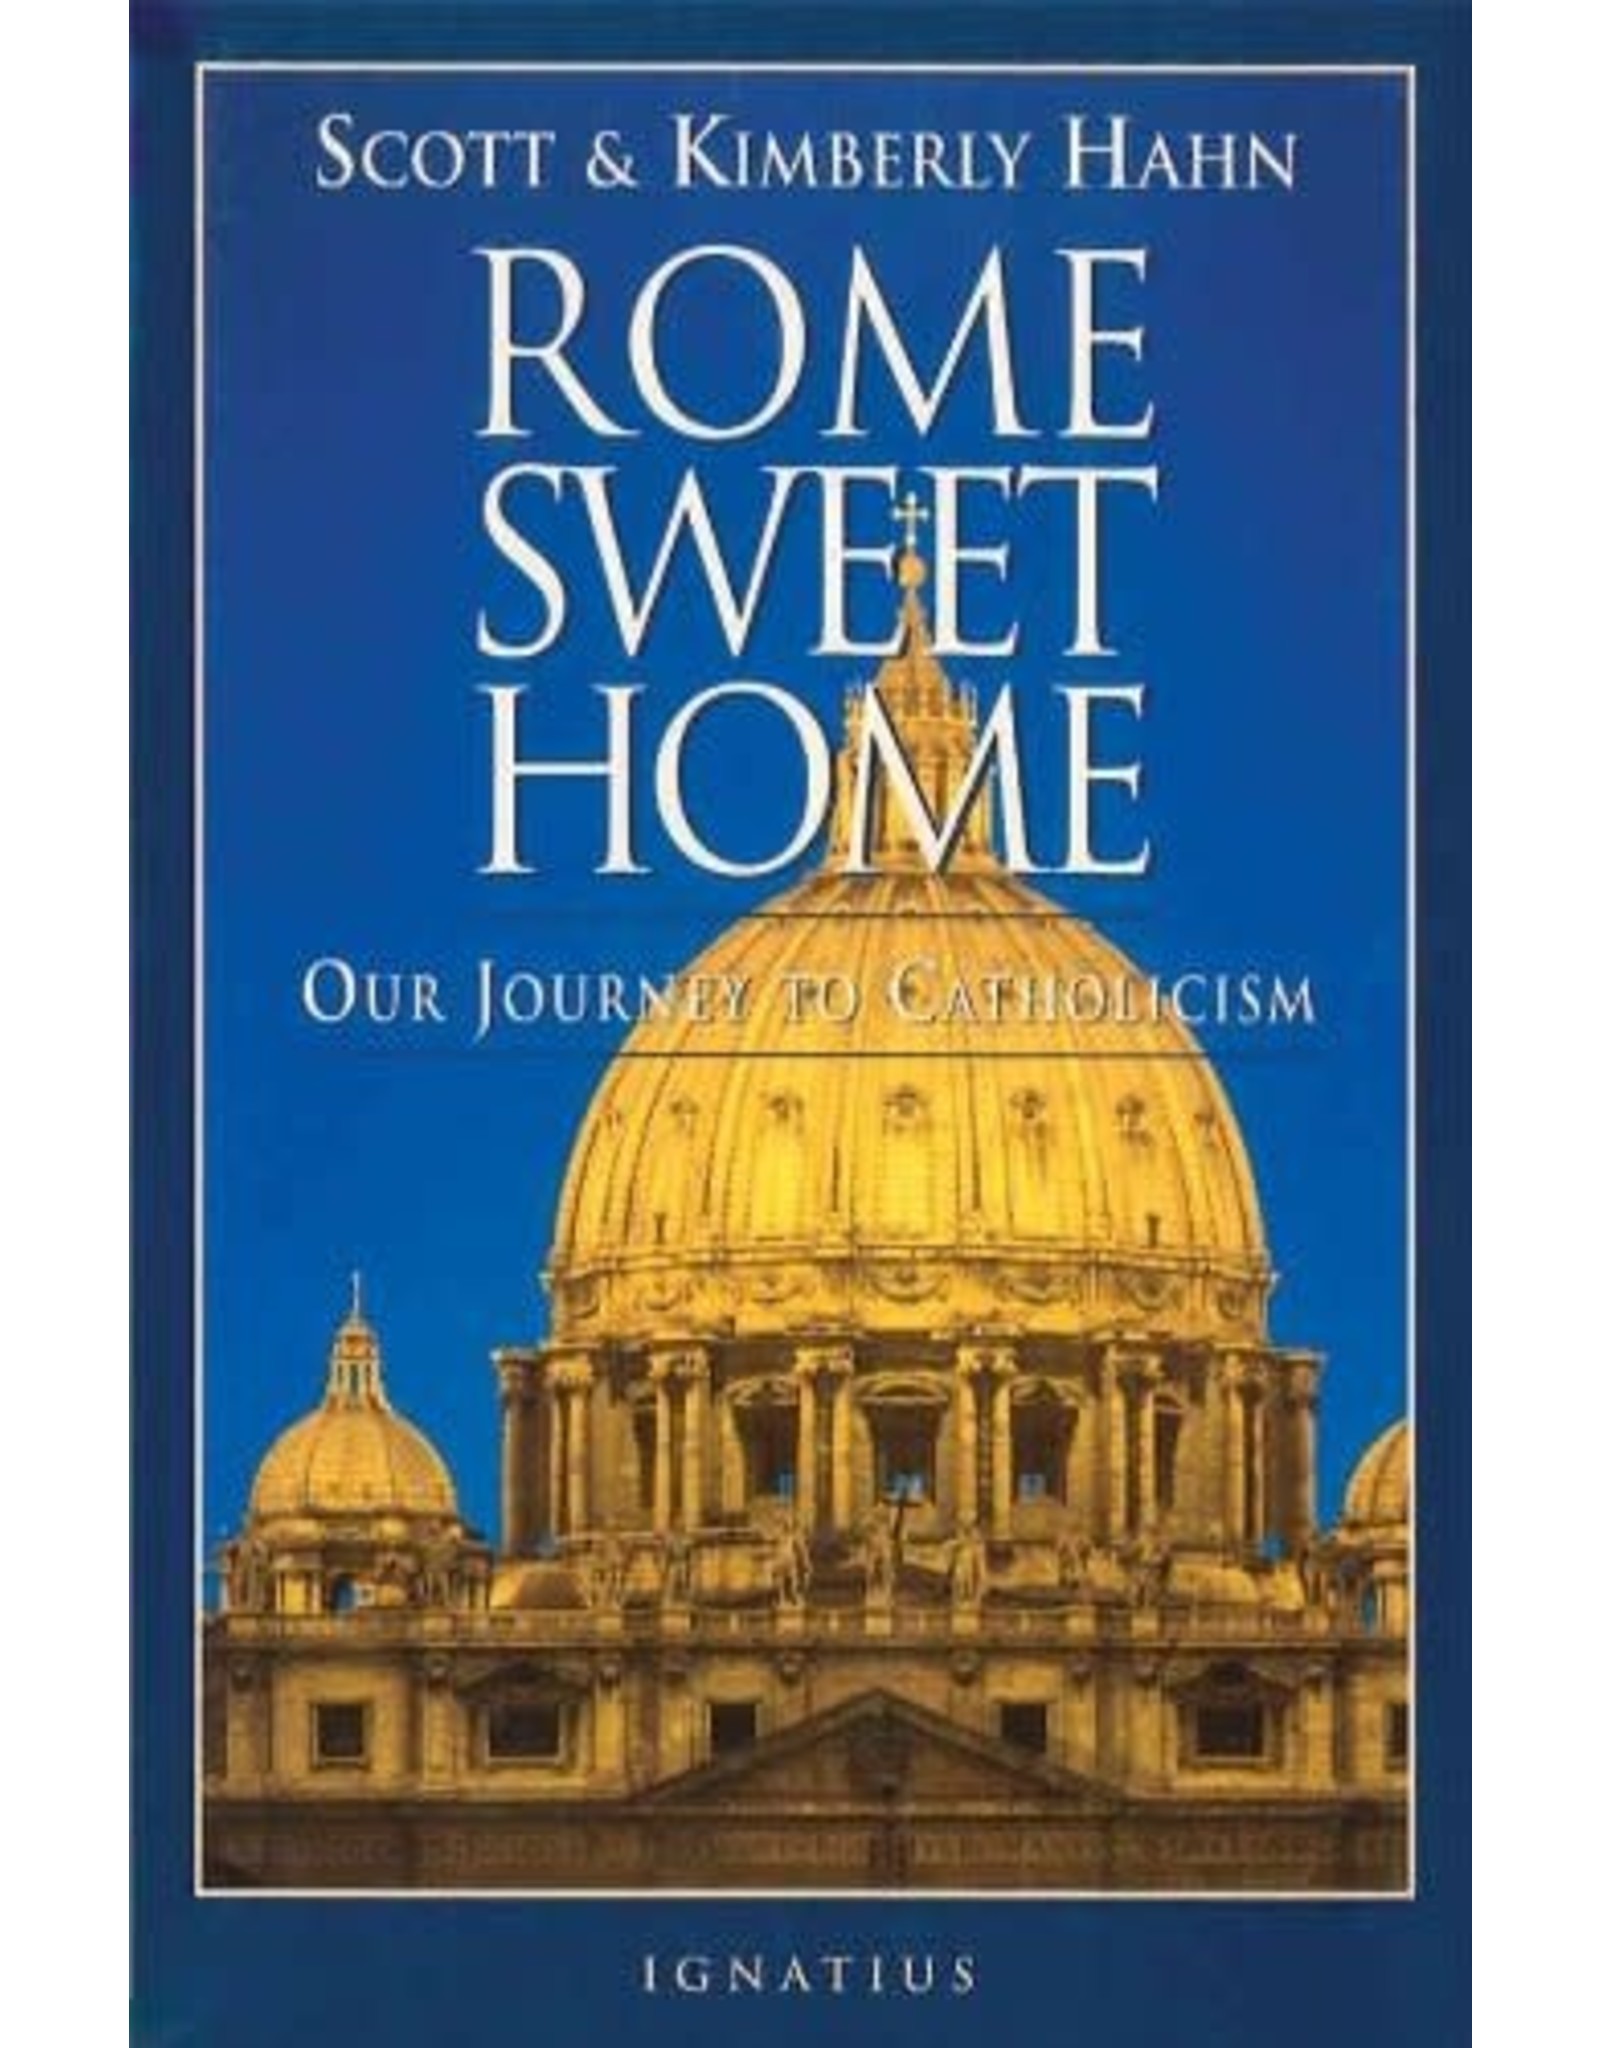 New Day Rome Sweet Home: Our Journey to Catholicism by Scott & Kimberly Hahn (Paperback)